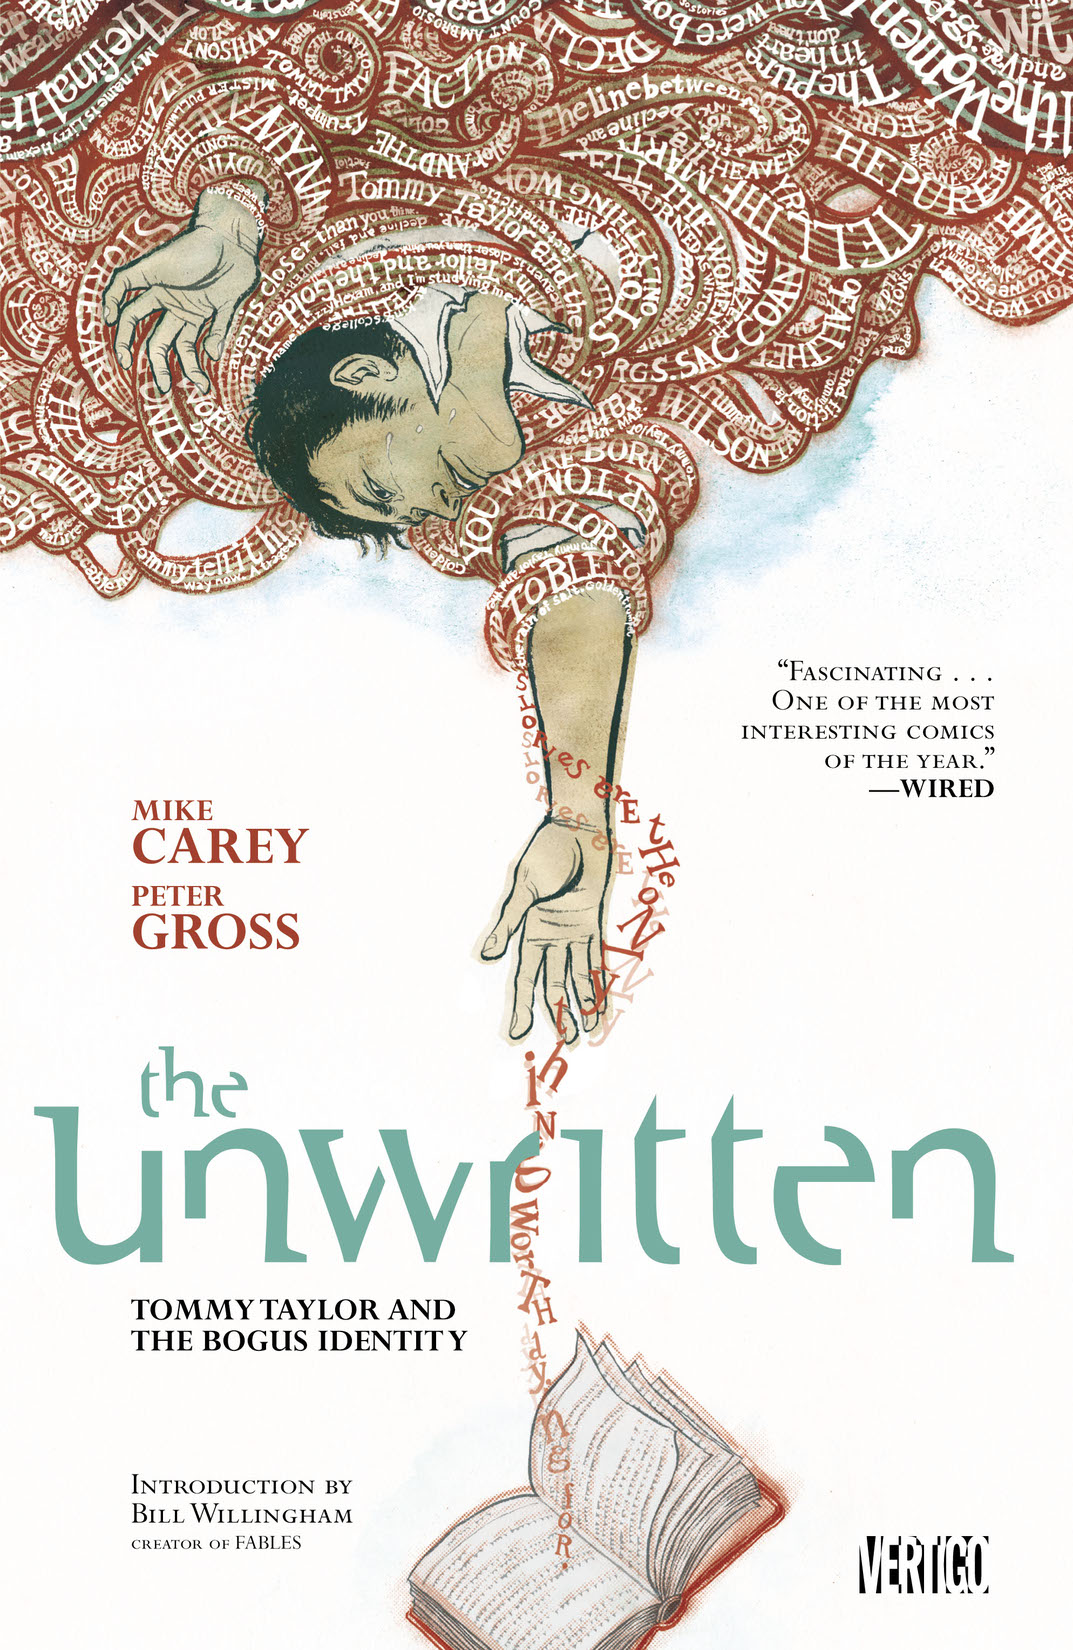 The Unwritten Vol. 1: Tommy Taylor and the Bogus Identity preview images